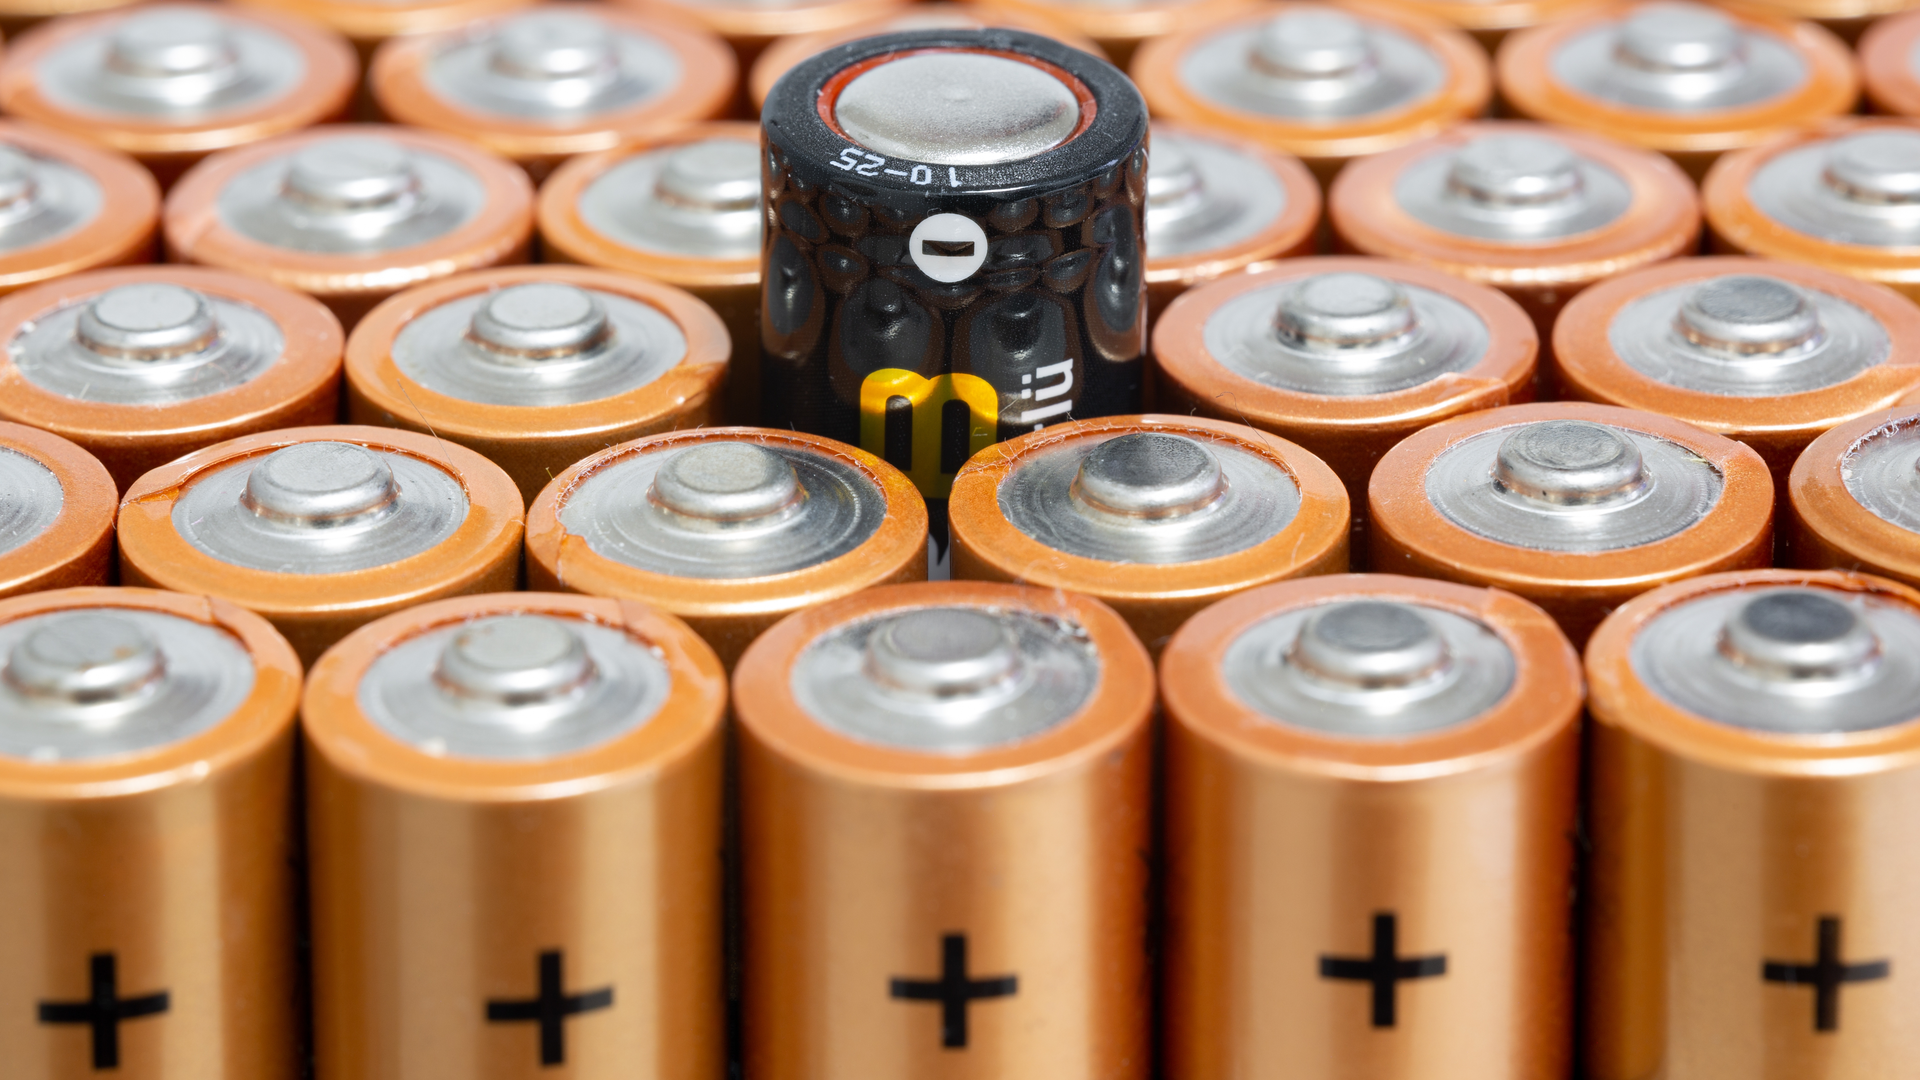 a pile of batteries, with one very different from the others